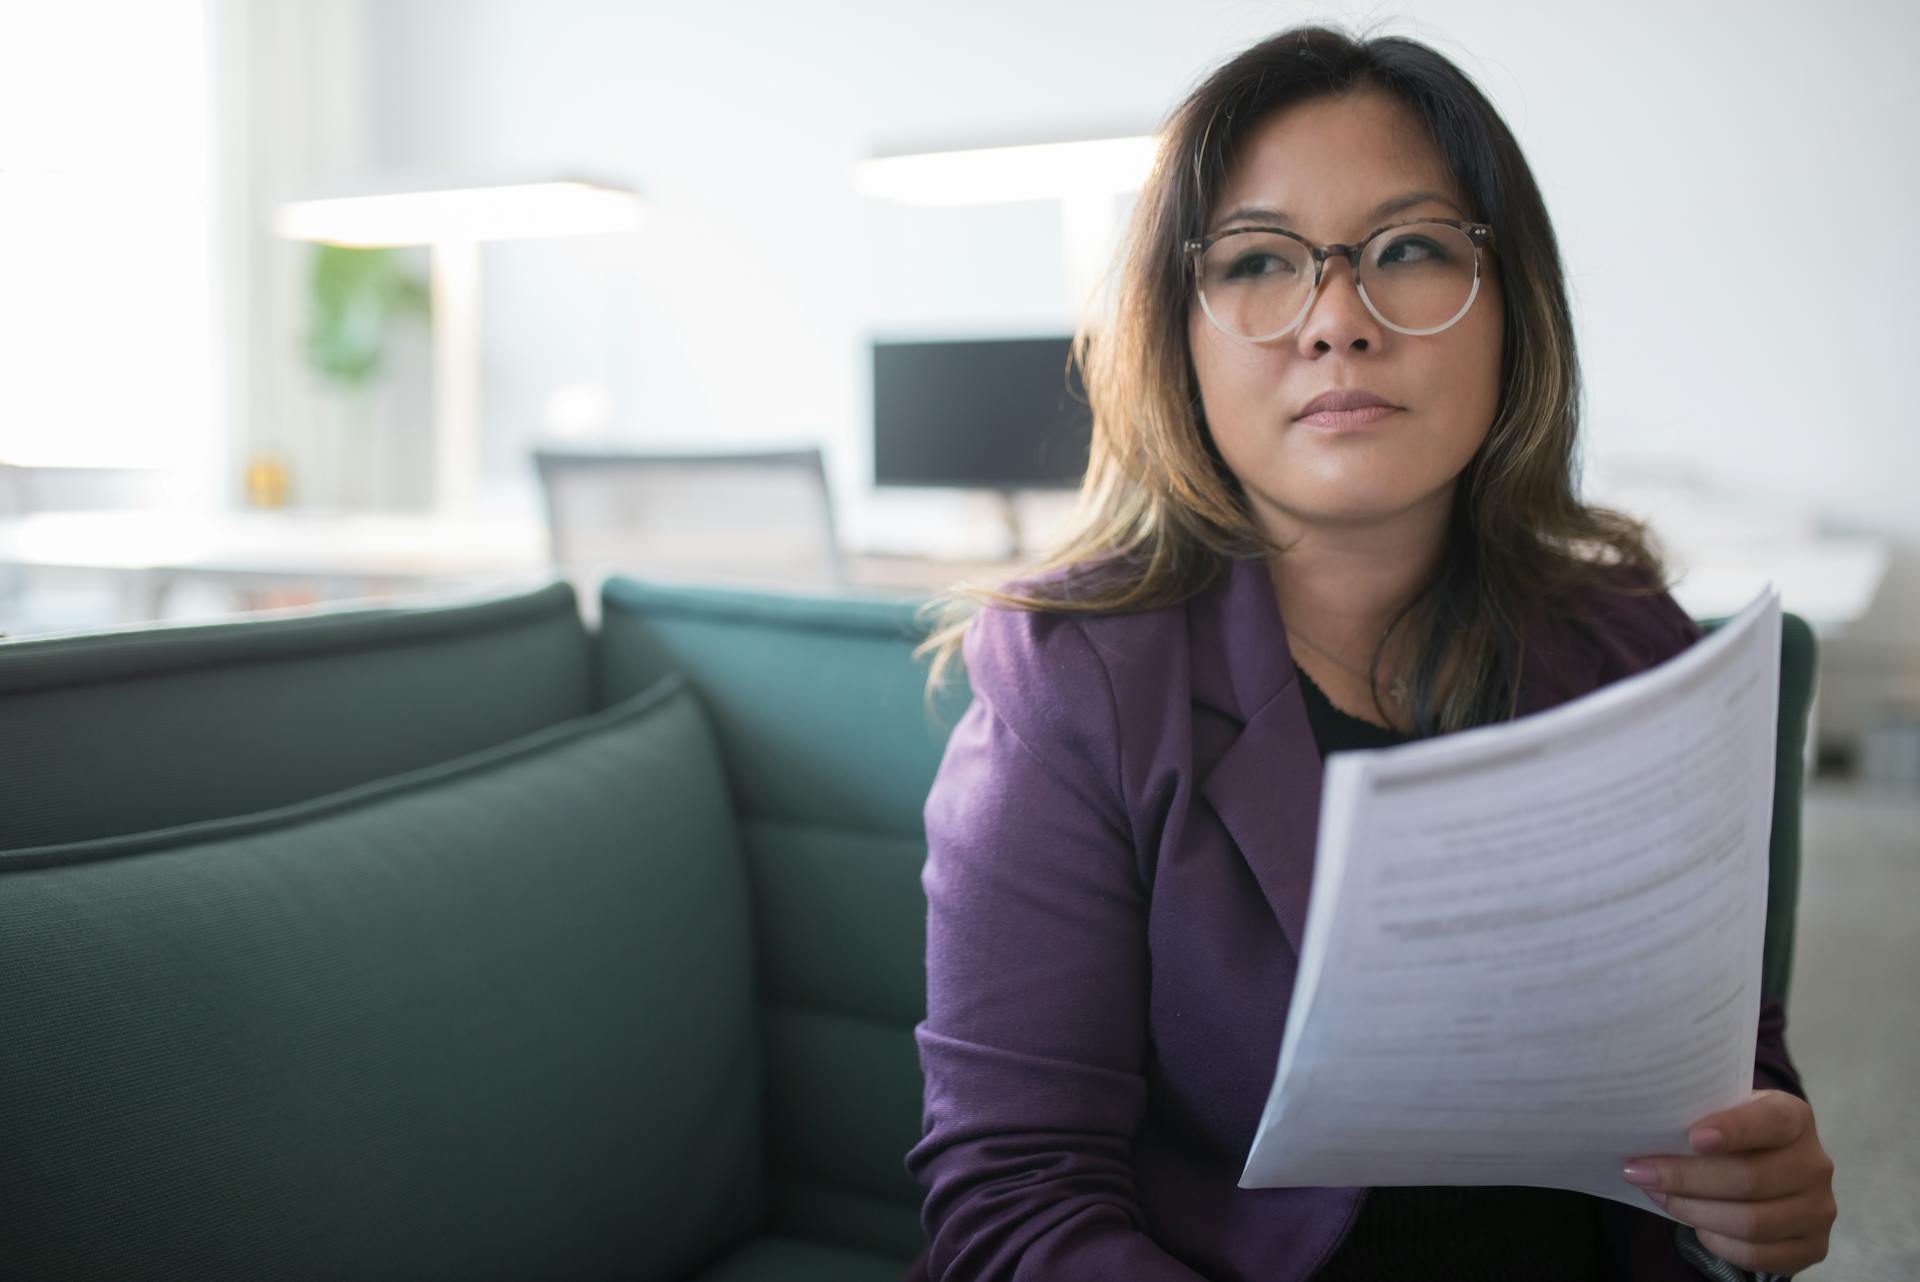 A woman thinking while holding a set of documents | Source: Pexels